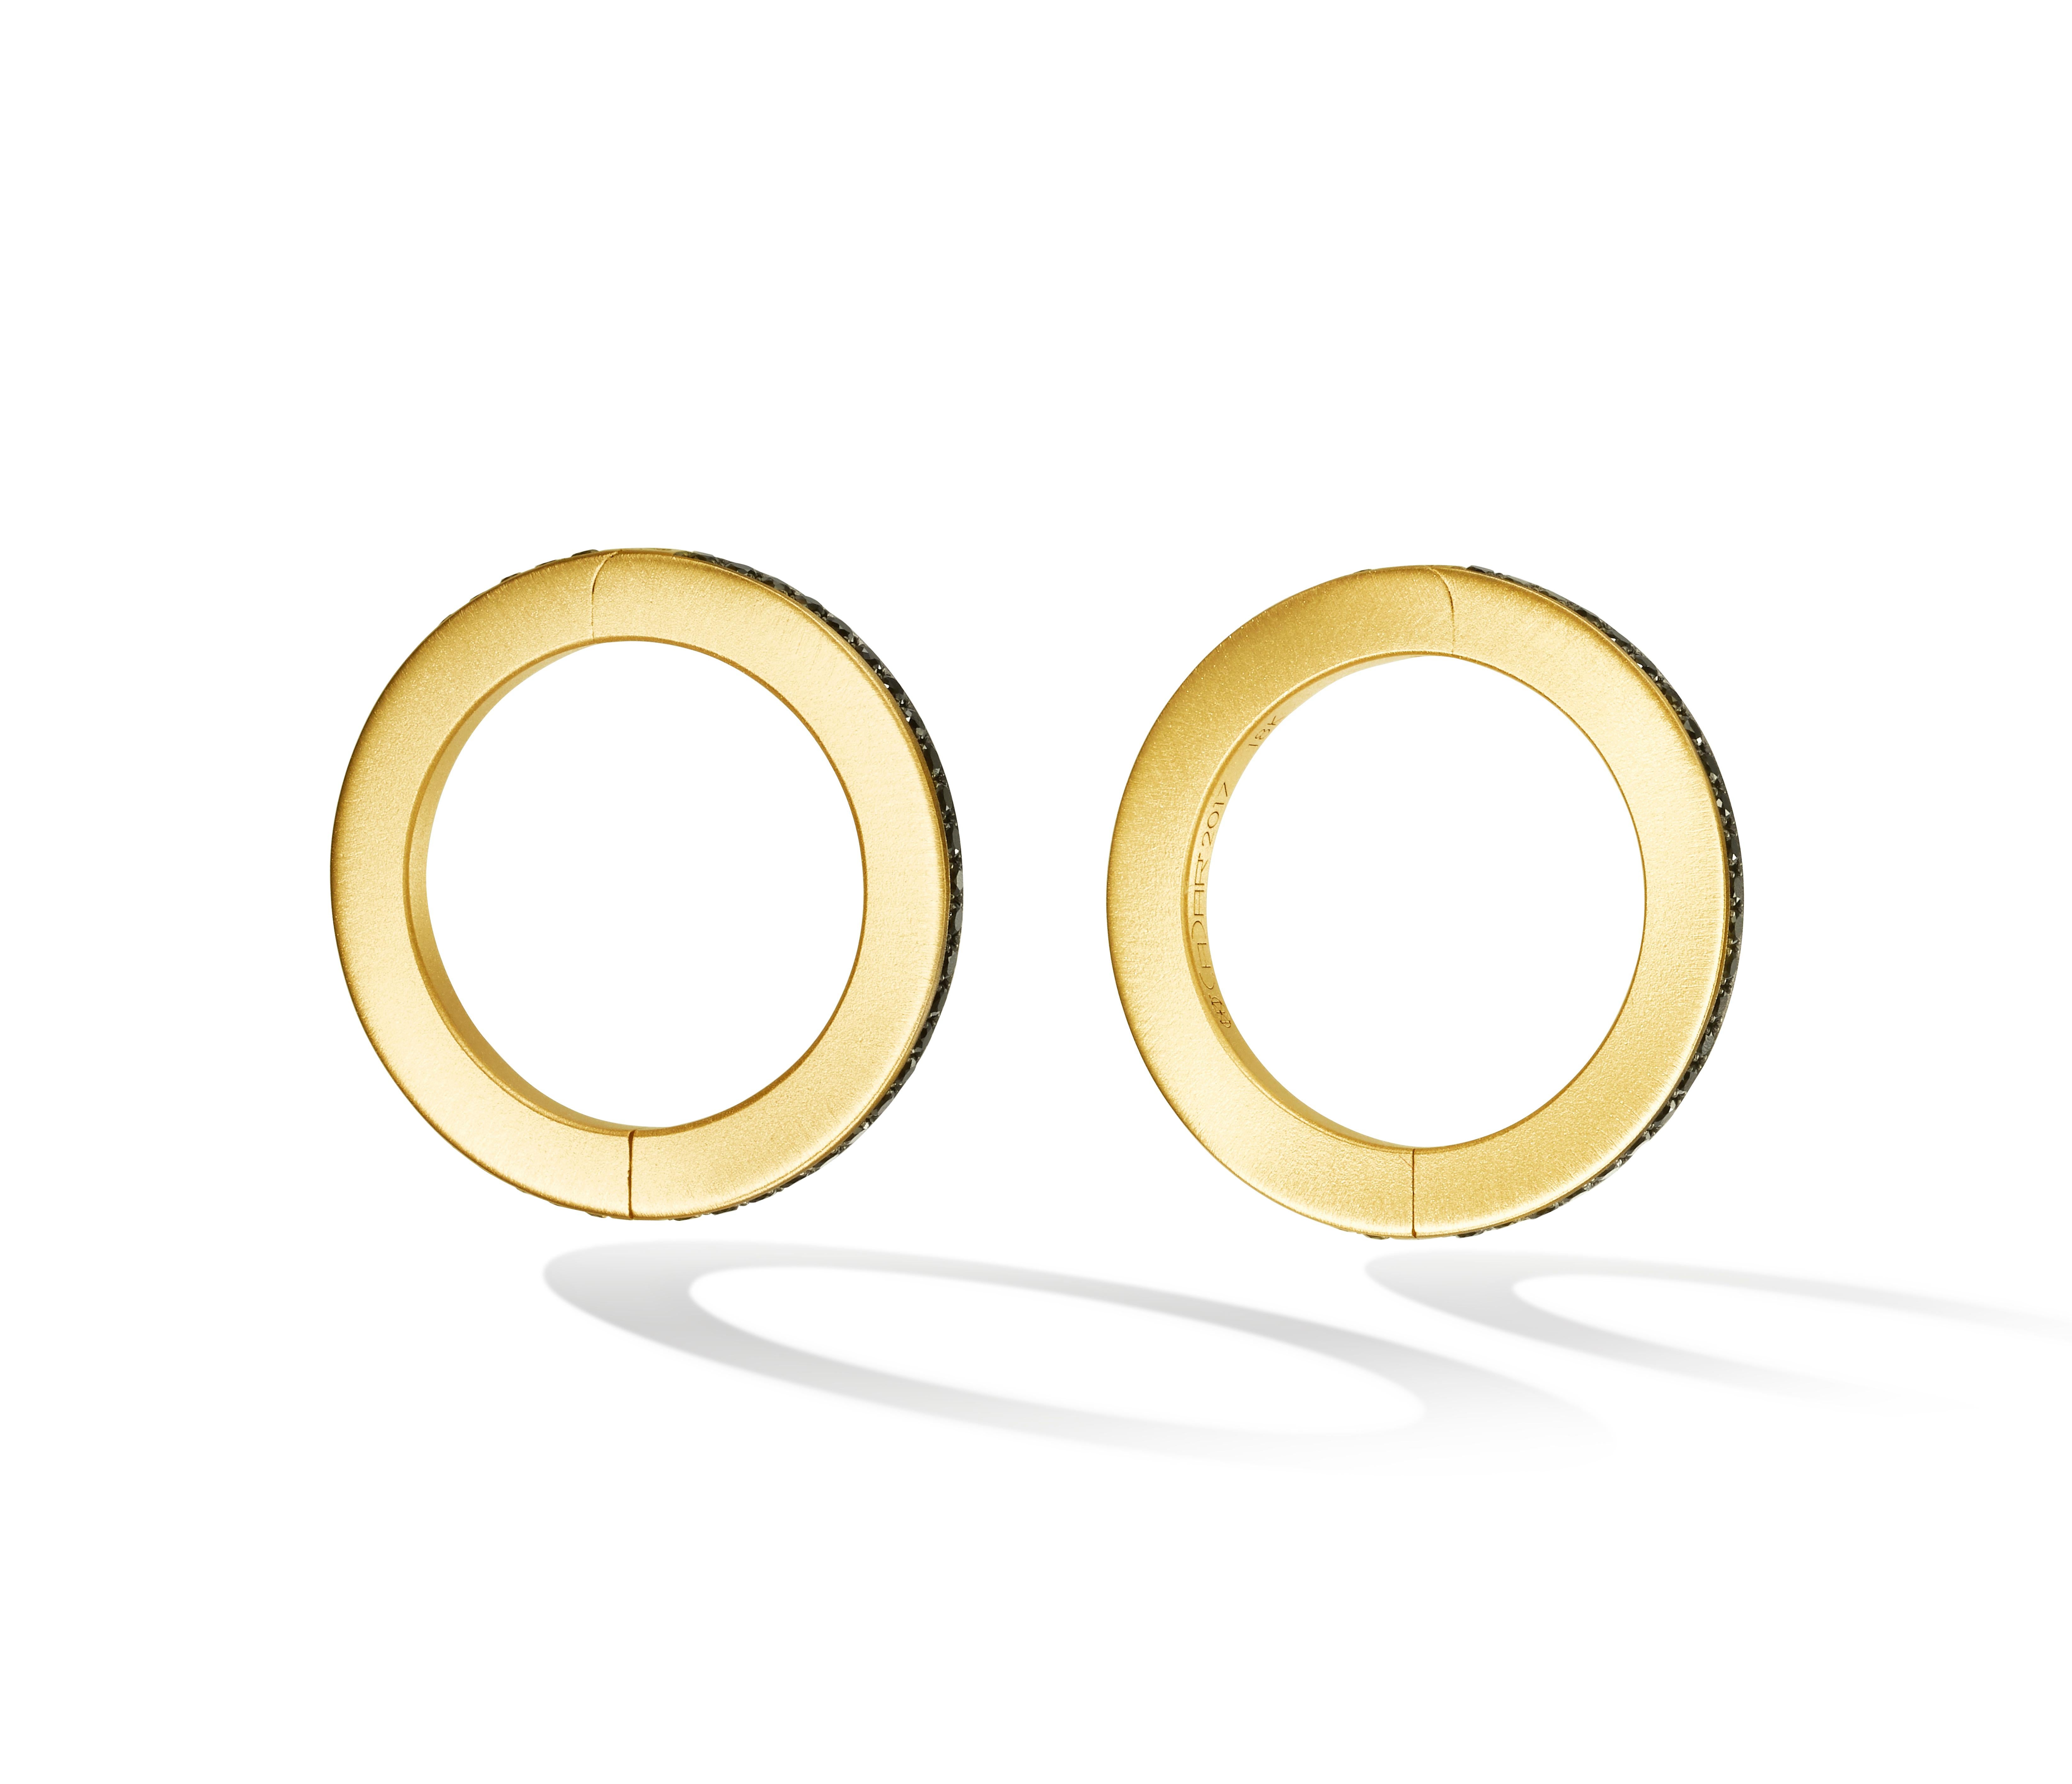 Modern minimalism. A subtle yet statement-making accessory and the perfect holiday gift. Handcrafted in 18K matte finished yellow gold and .96cttw black GVVS-2 diamonds encircling the circular shape of the cufflinks. 

Also available in solid matte